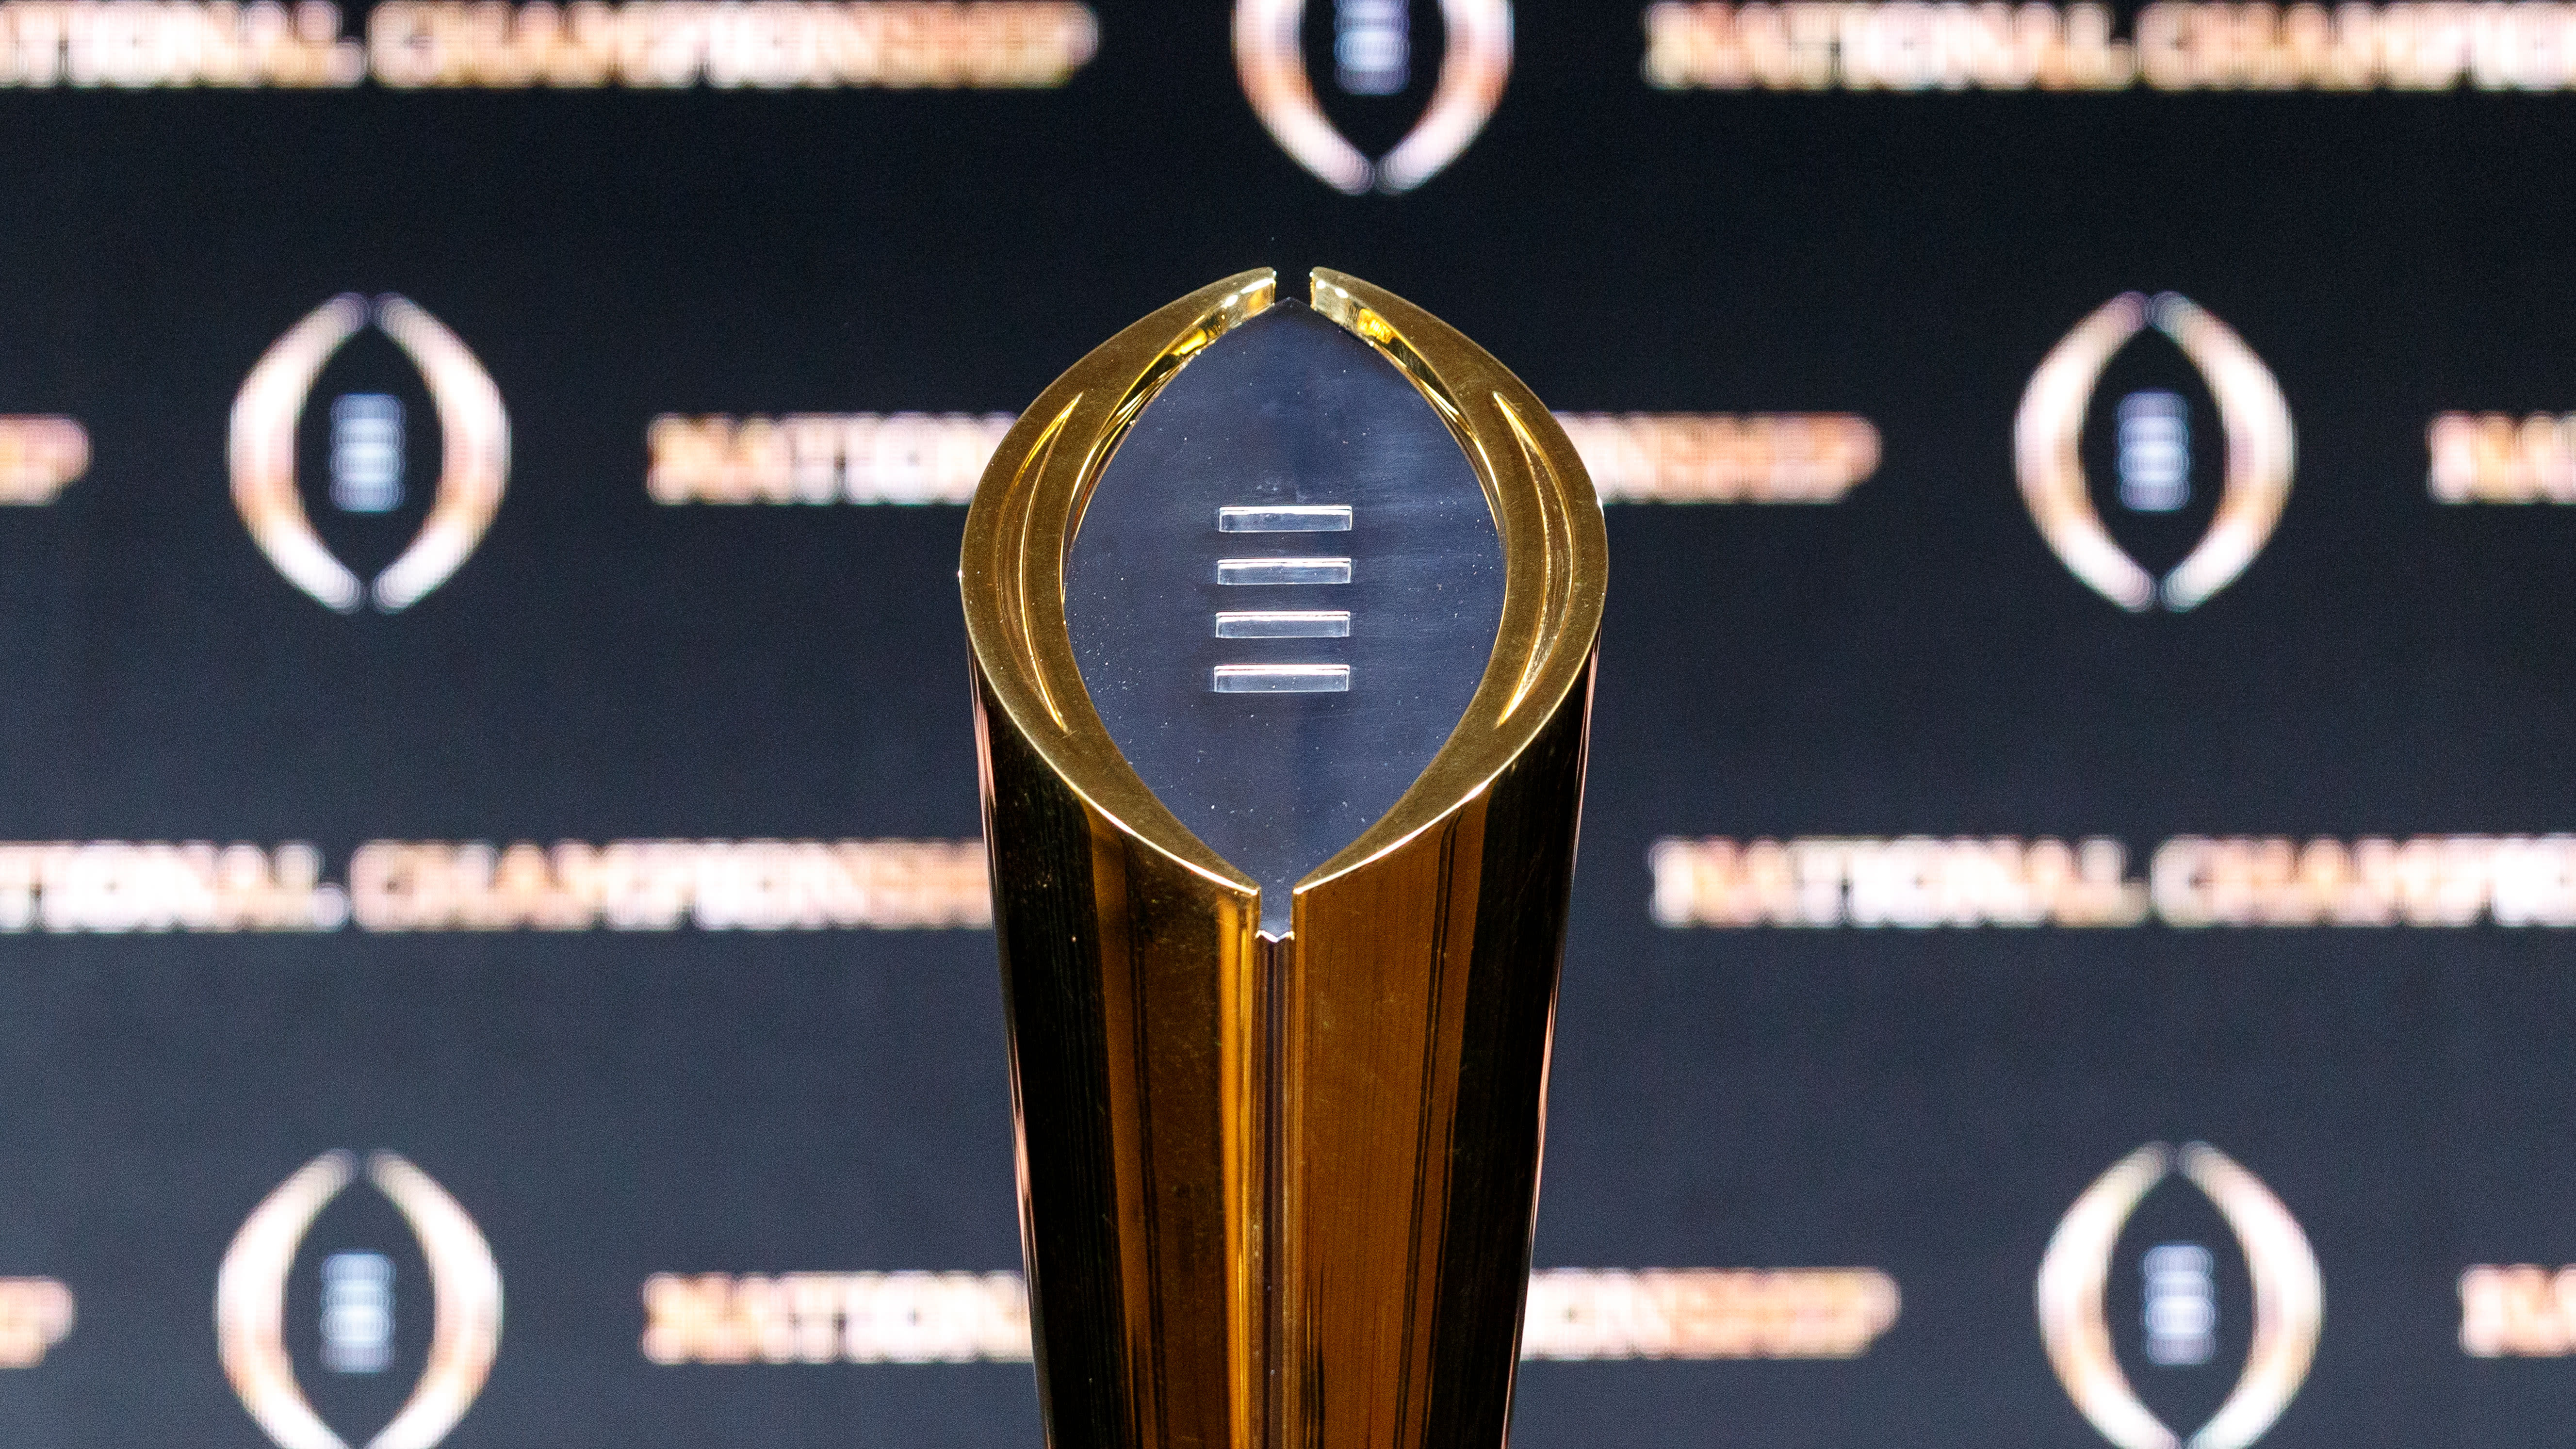 College Football Playoff announces schedule for new 12-team event in 2024-25